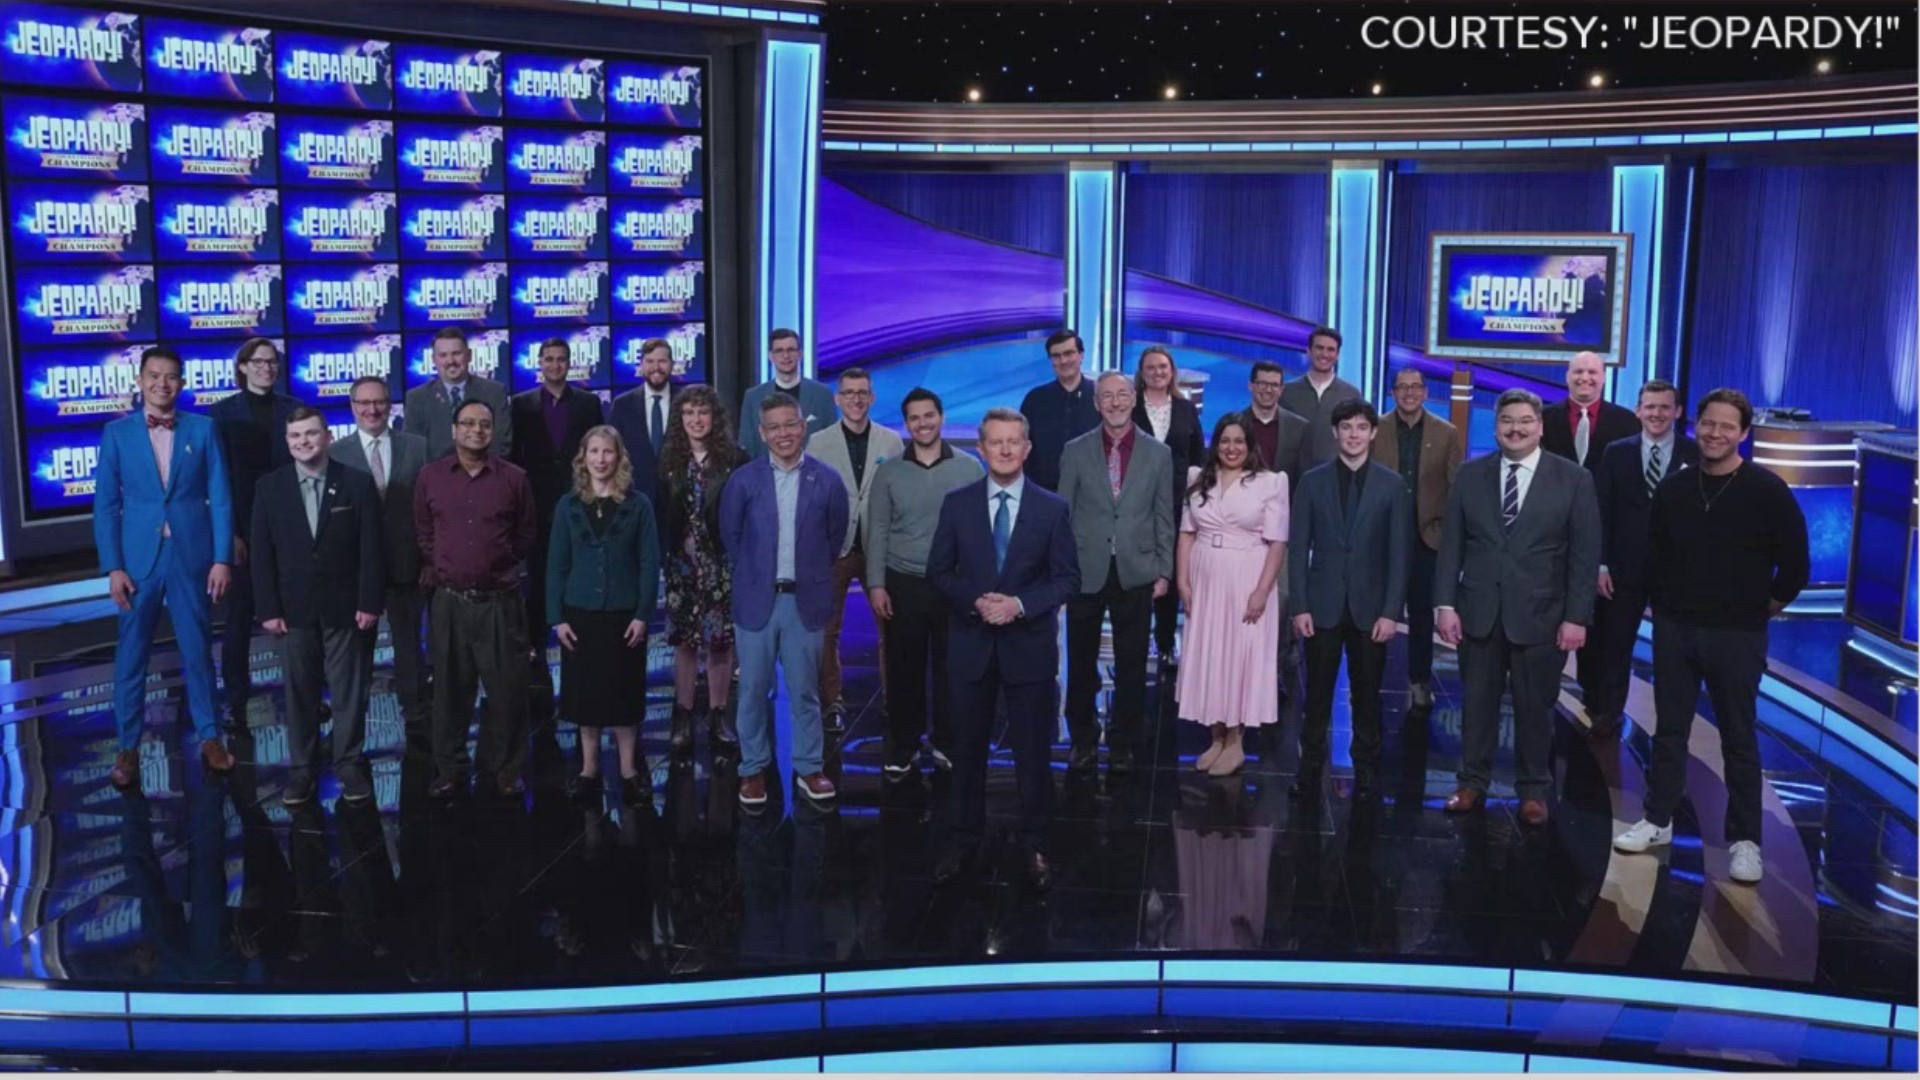 The contestants will compete in the 'Jeopardy!' Tournament of Champions.